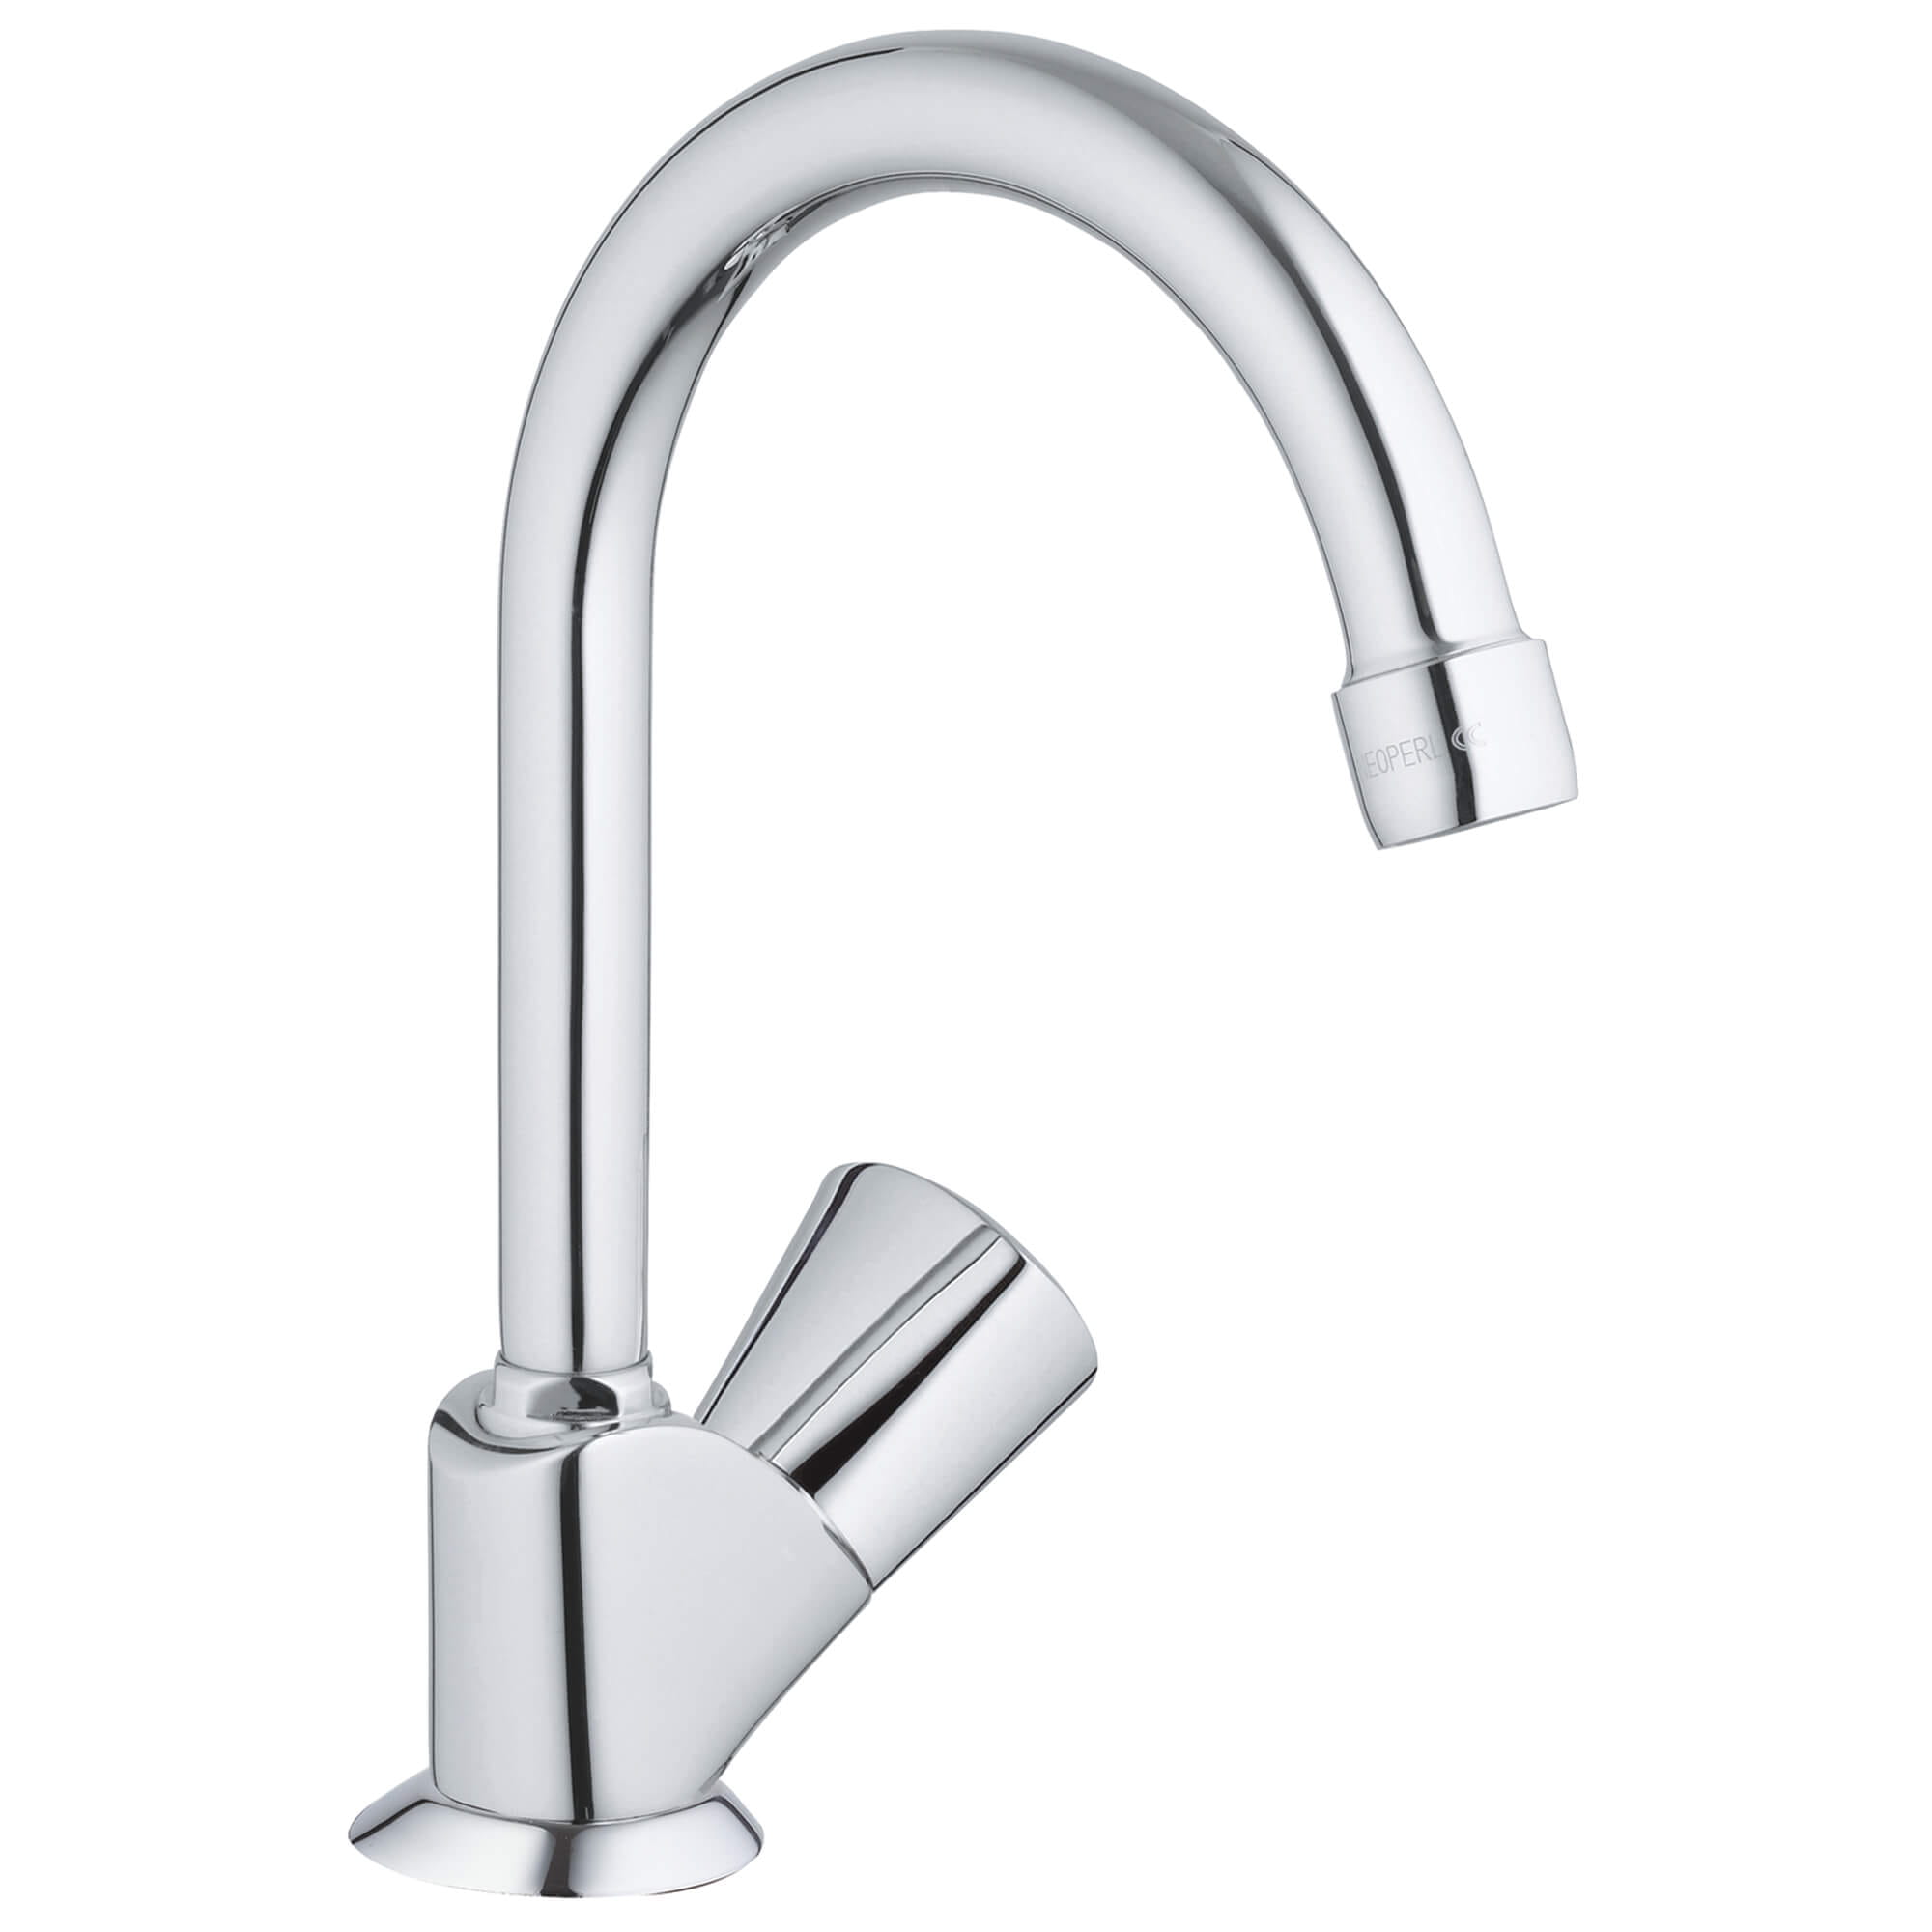 COSTA  SINGLE-HANDLE KITCHEN FAUCET 1.75 GPM-related